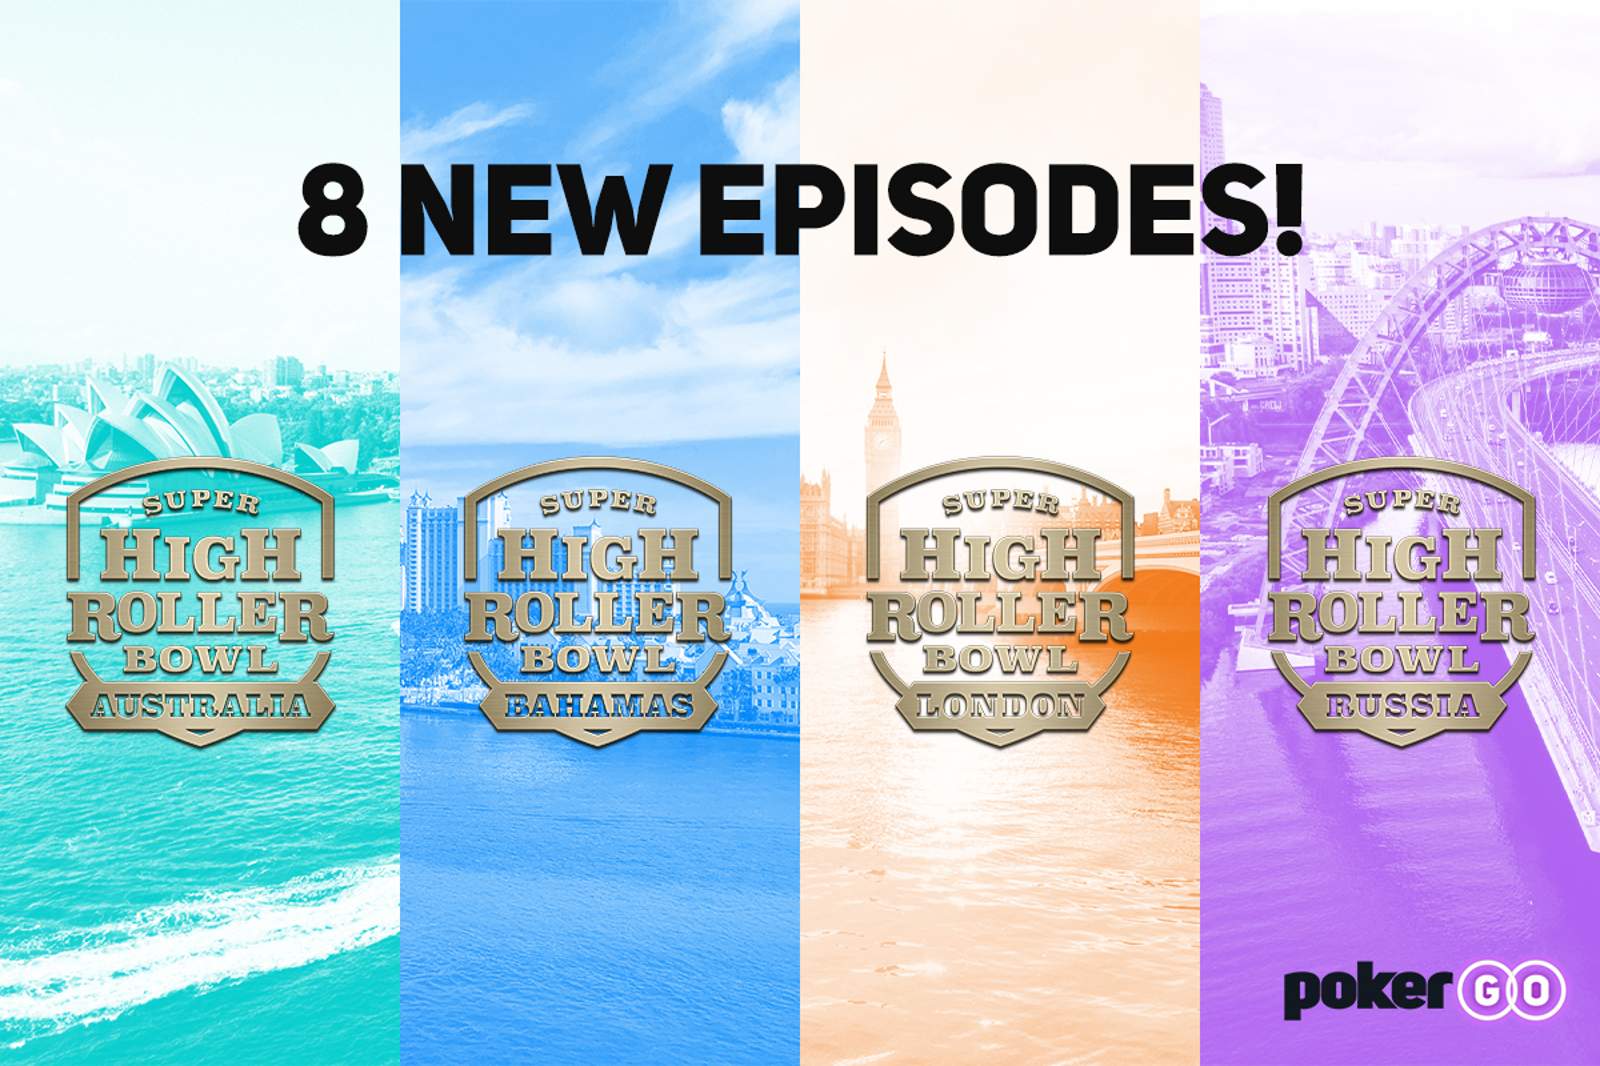 Super High Roller Bowl Collection Expands with 8 Episodes Added to PokerGO